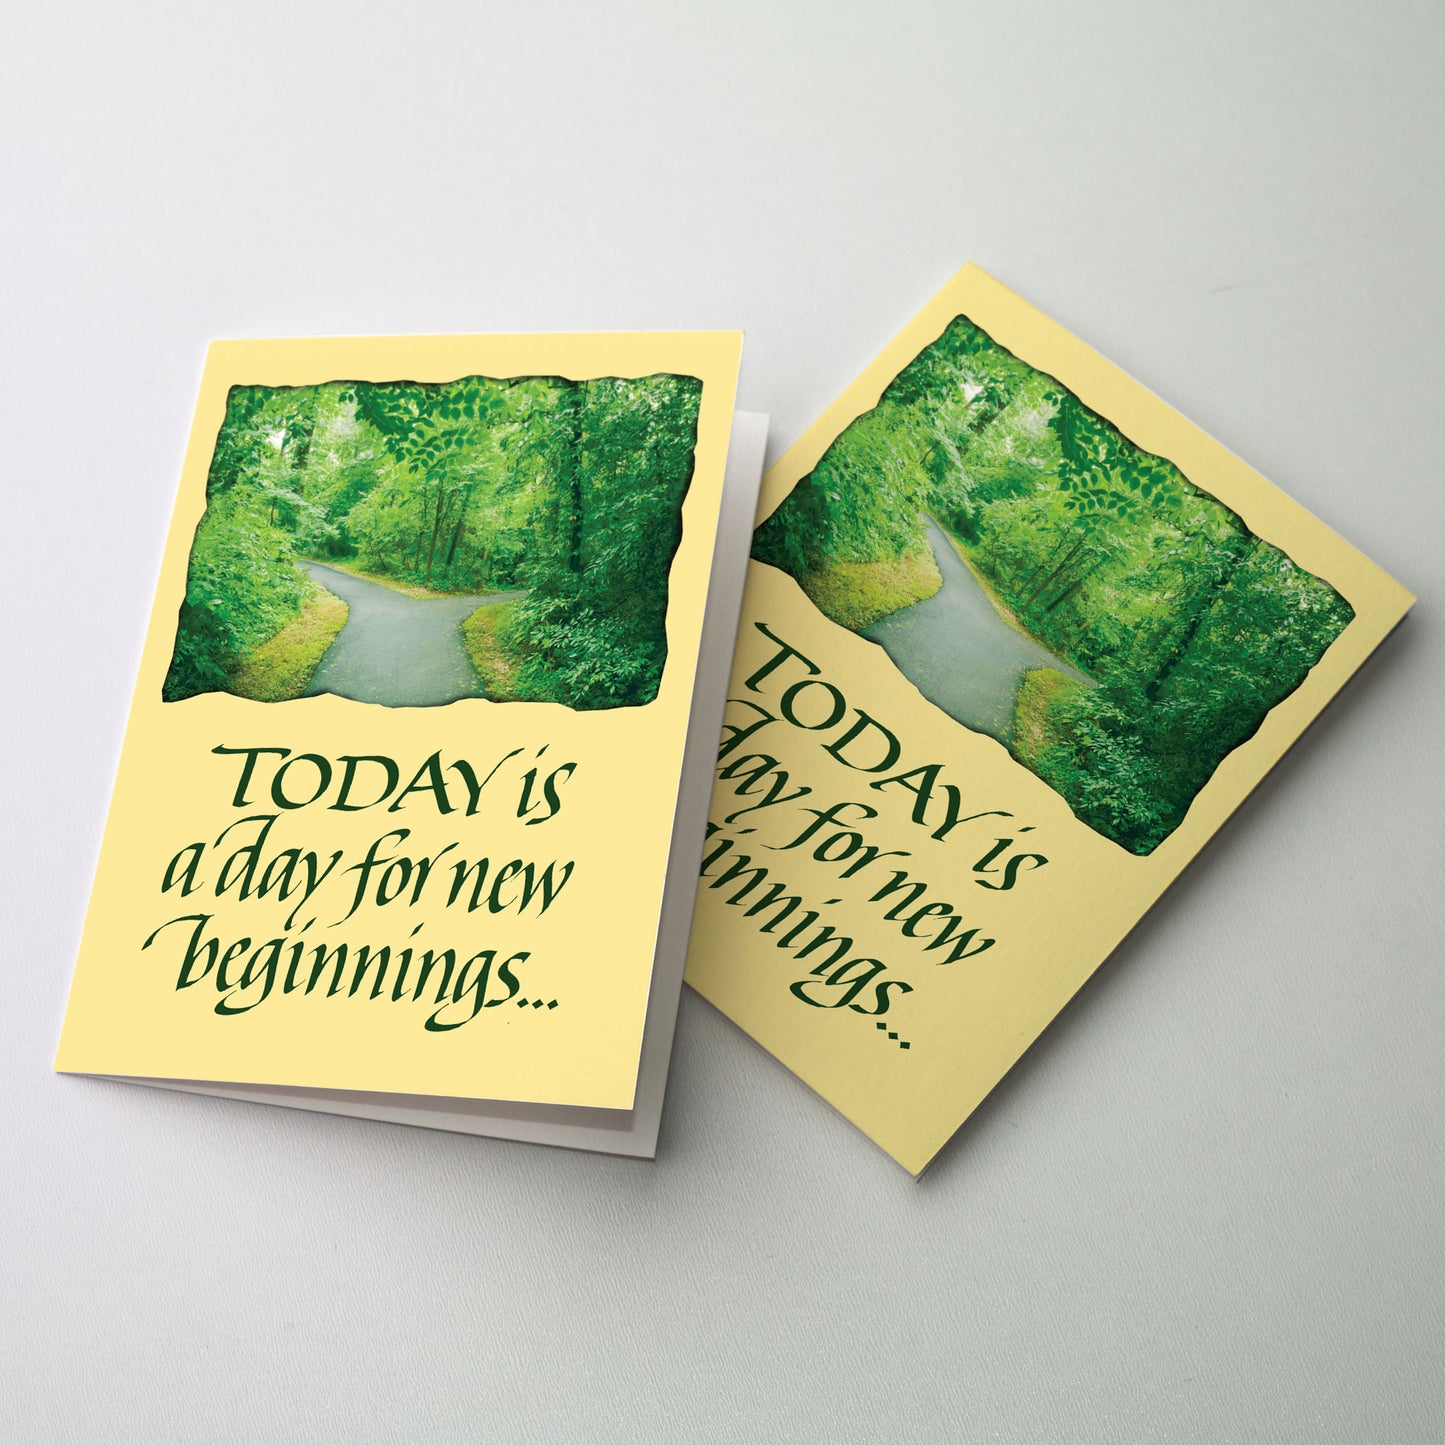 Today is a day for new beginnings - Transfer/Moving Card